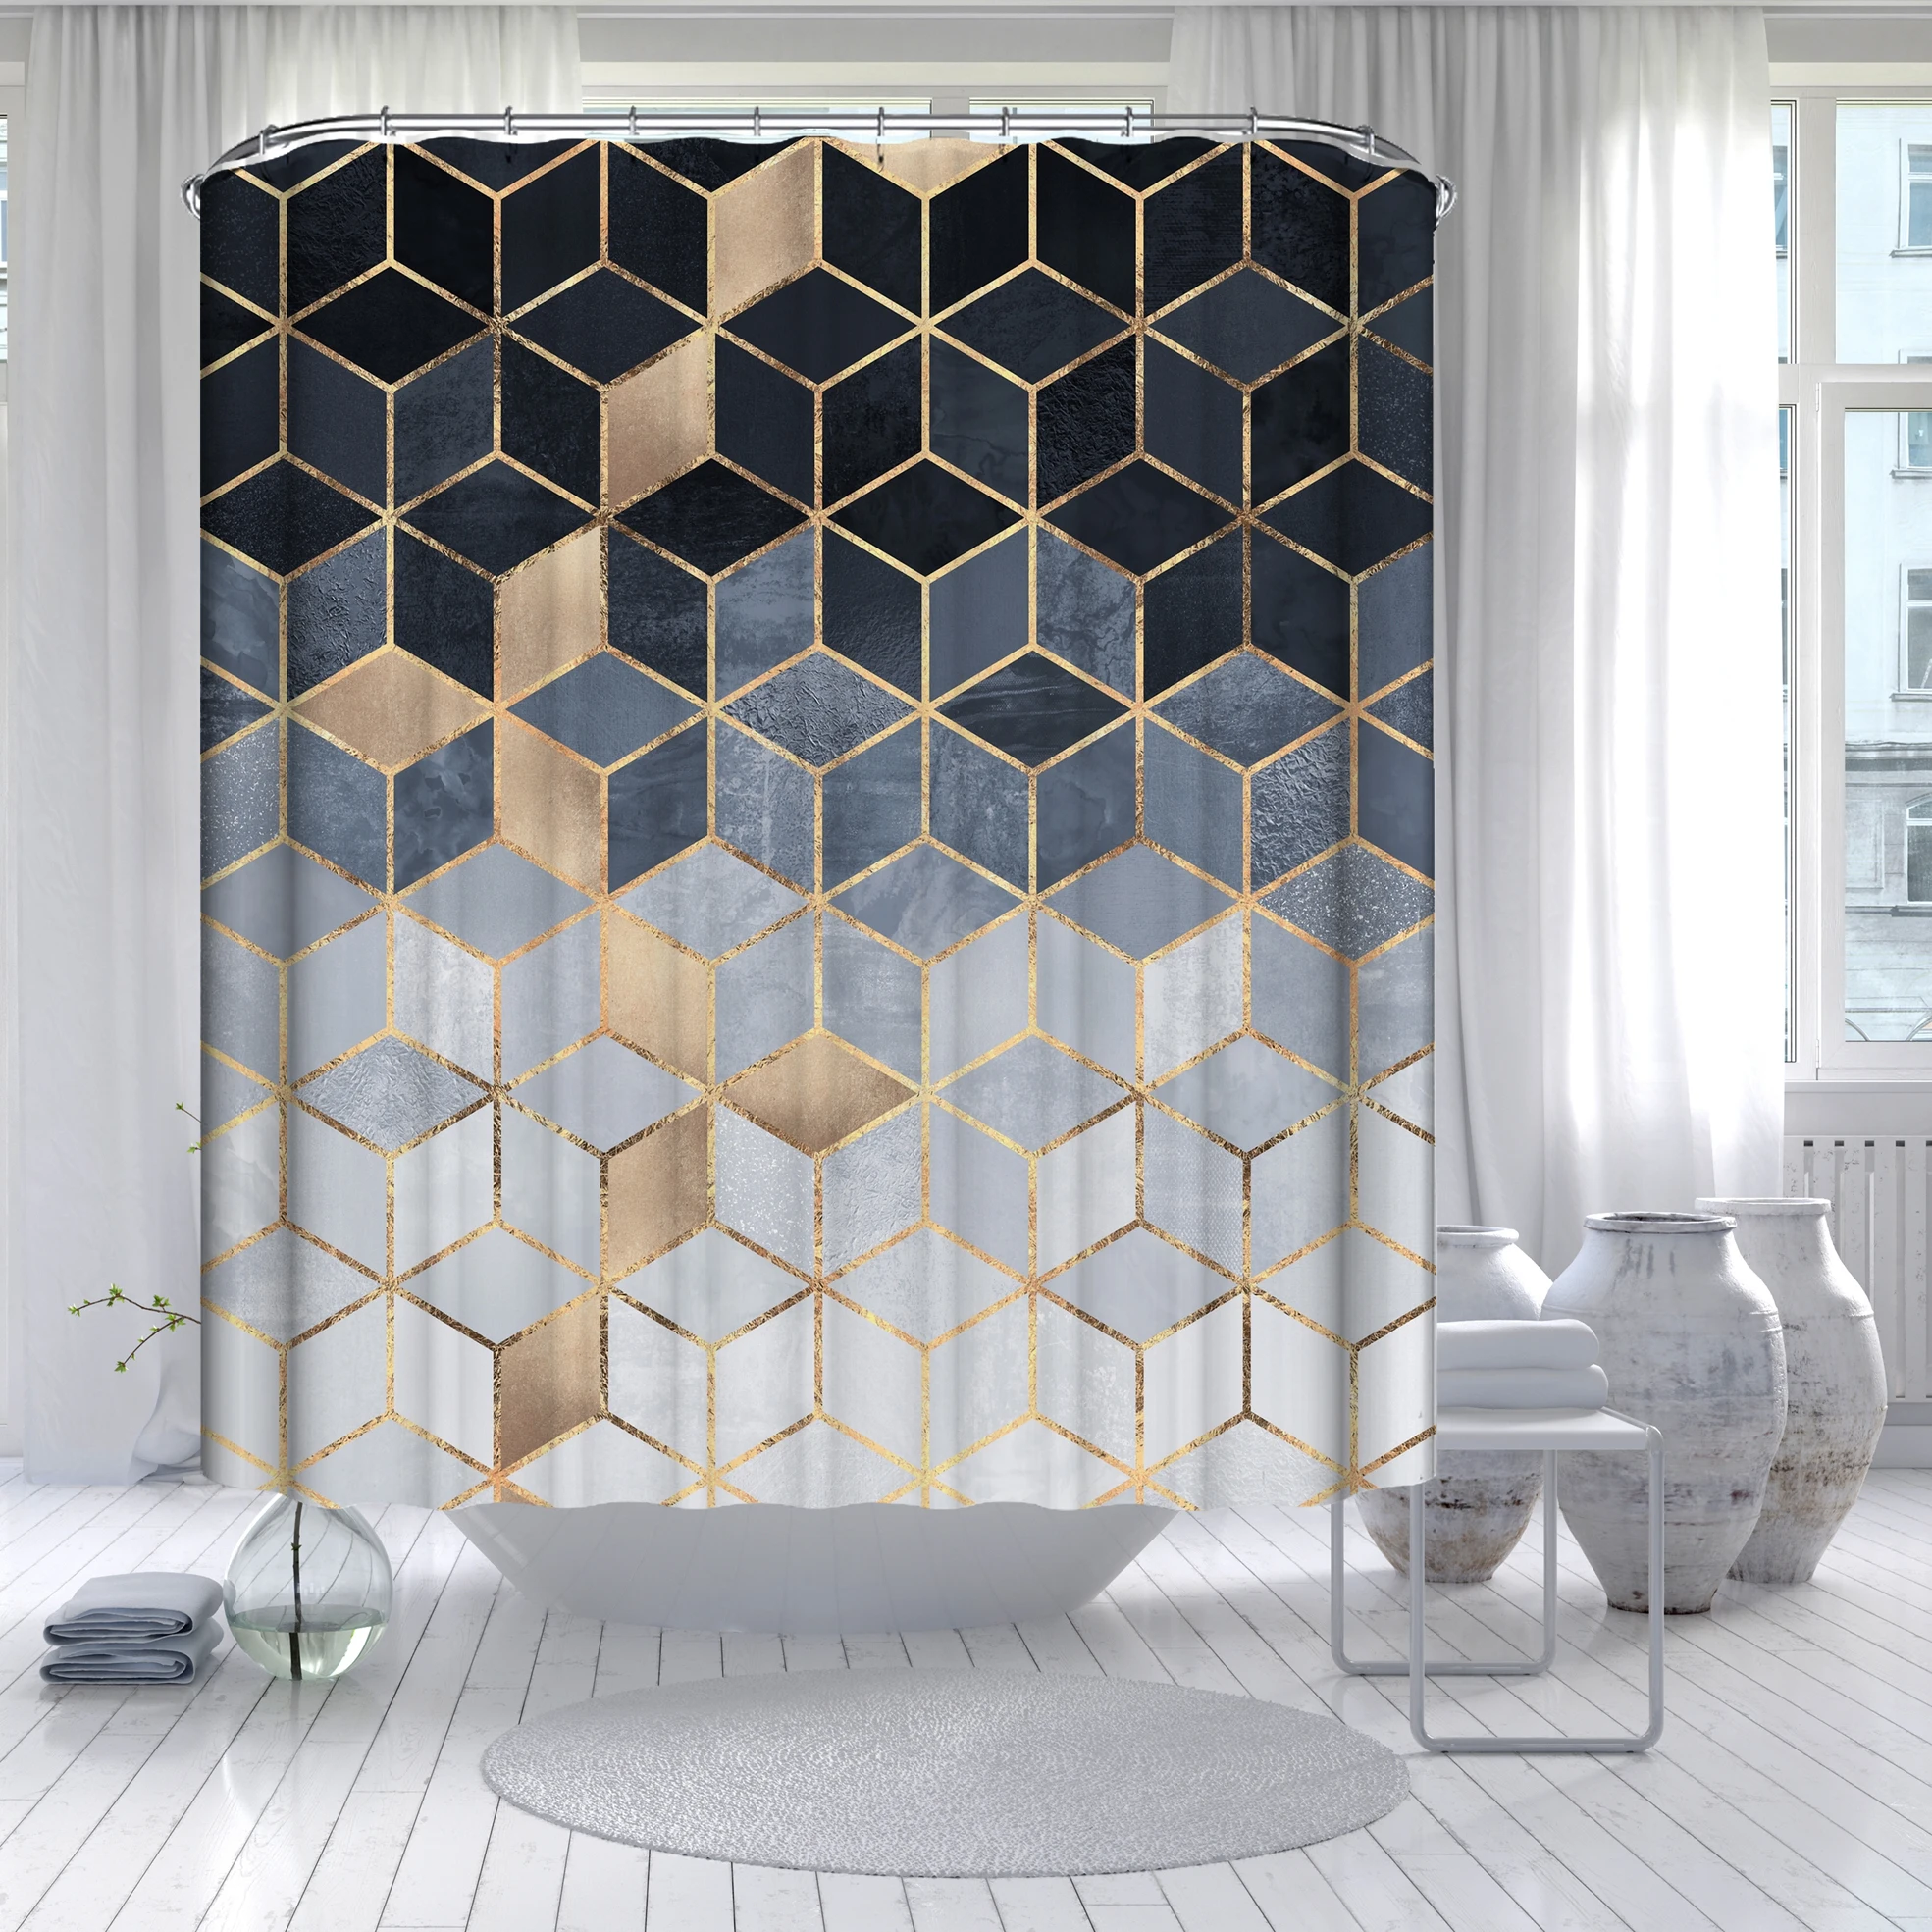 

2021 Best Selling 3D Bath Printed Geometric Pattern Shower Curtain Ready To Ship, Customized color